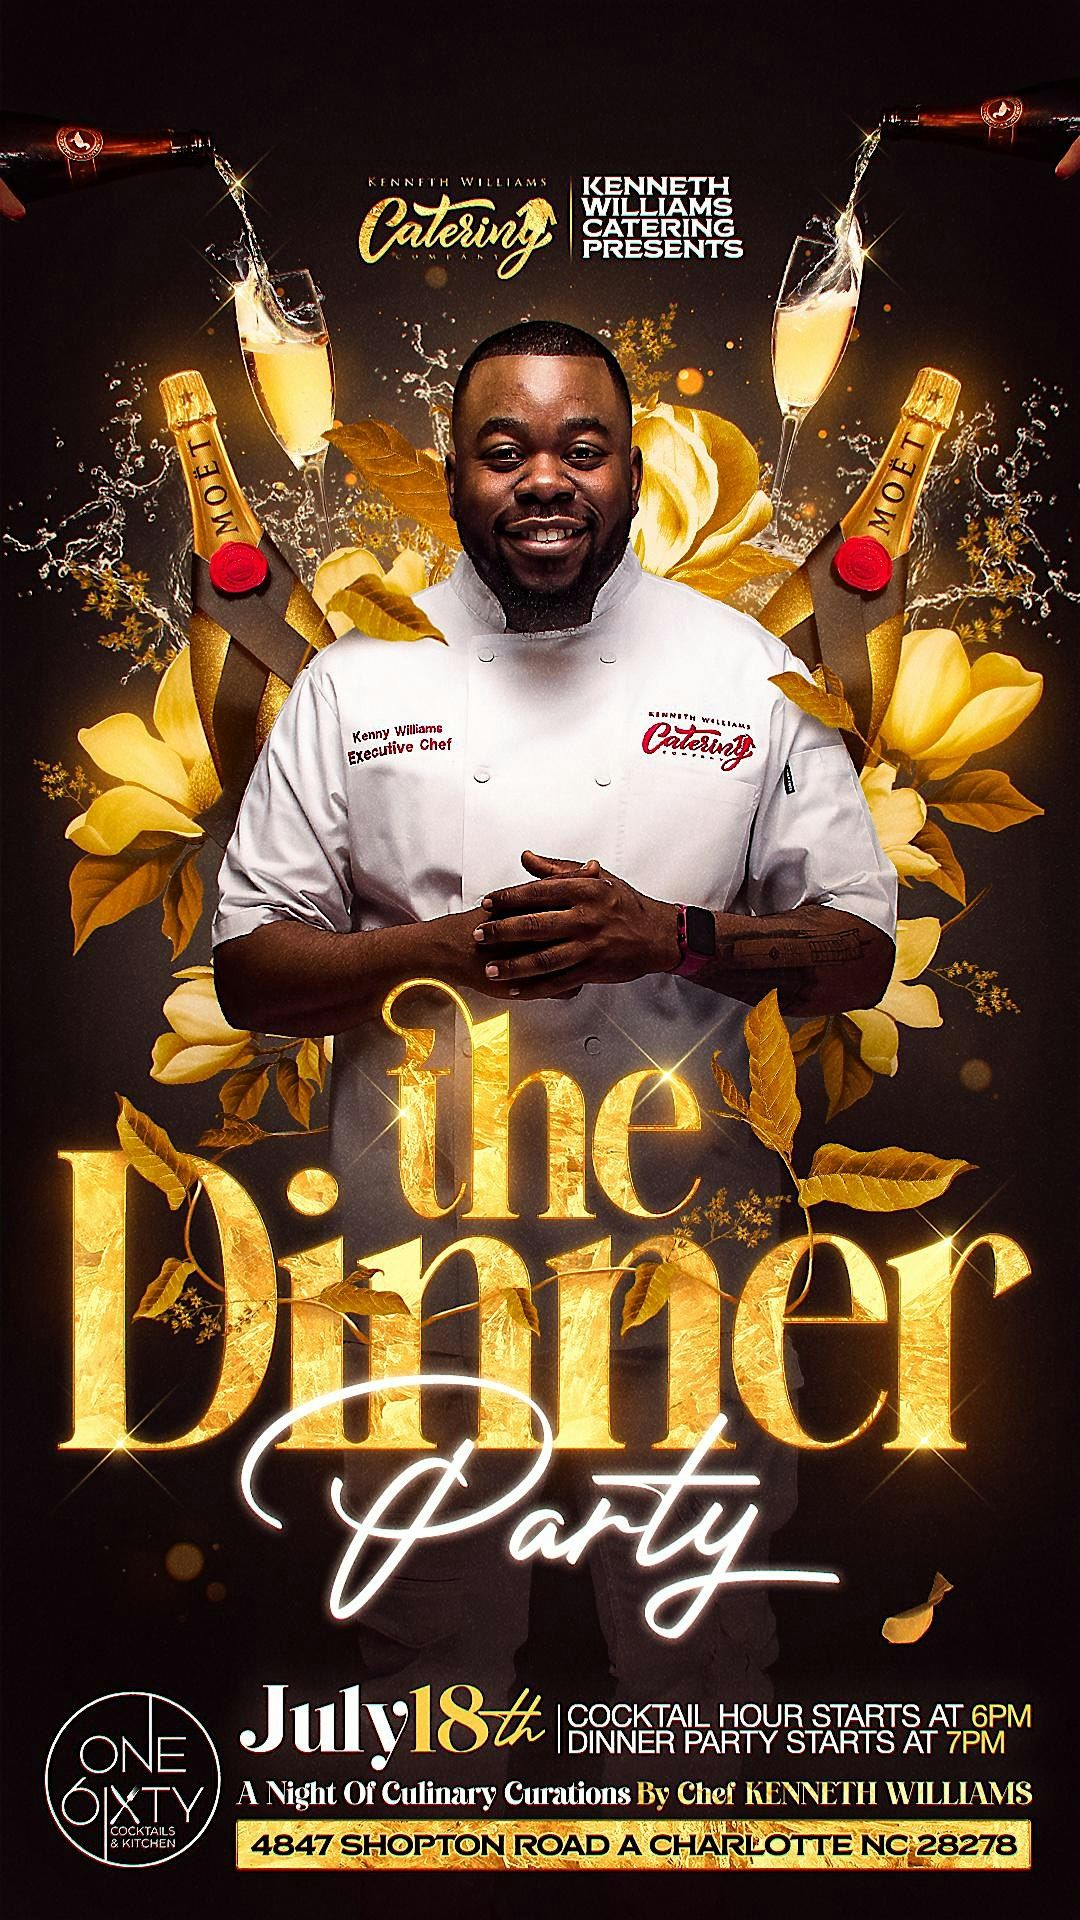 The Dinner Party! A night of culinary curations by Chef Kenneth Williams